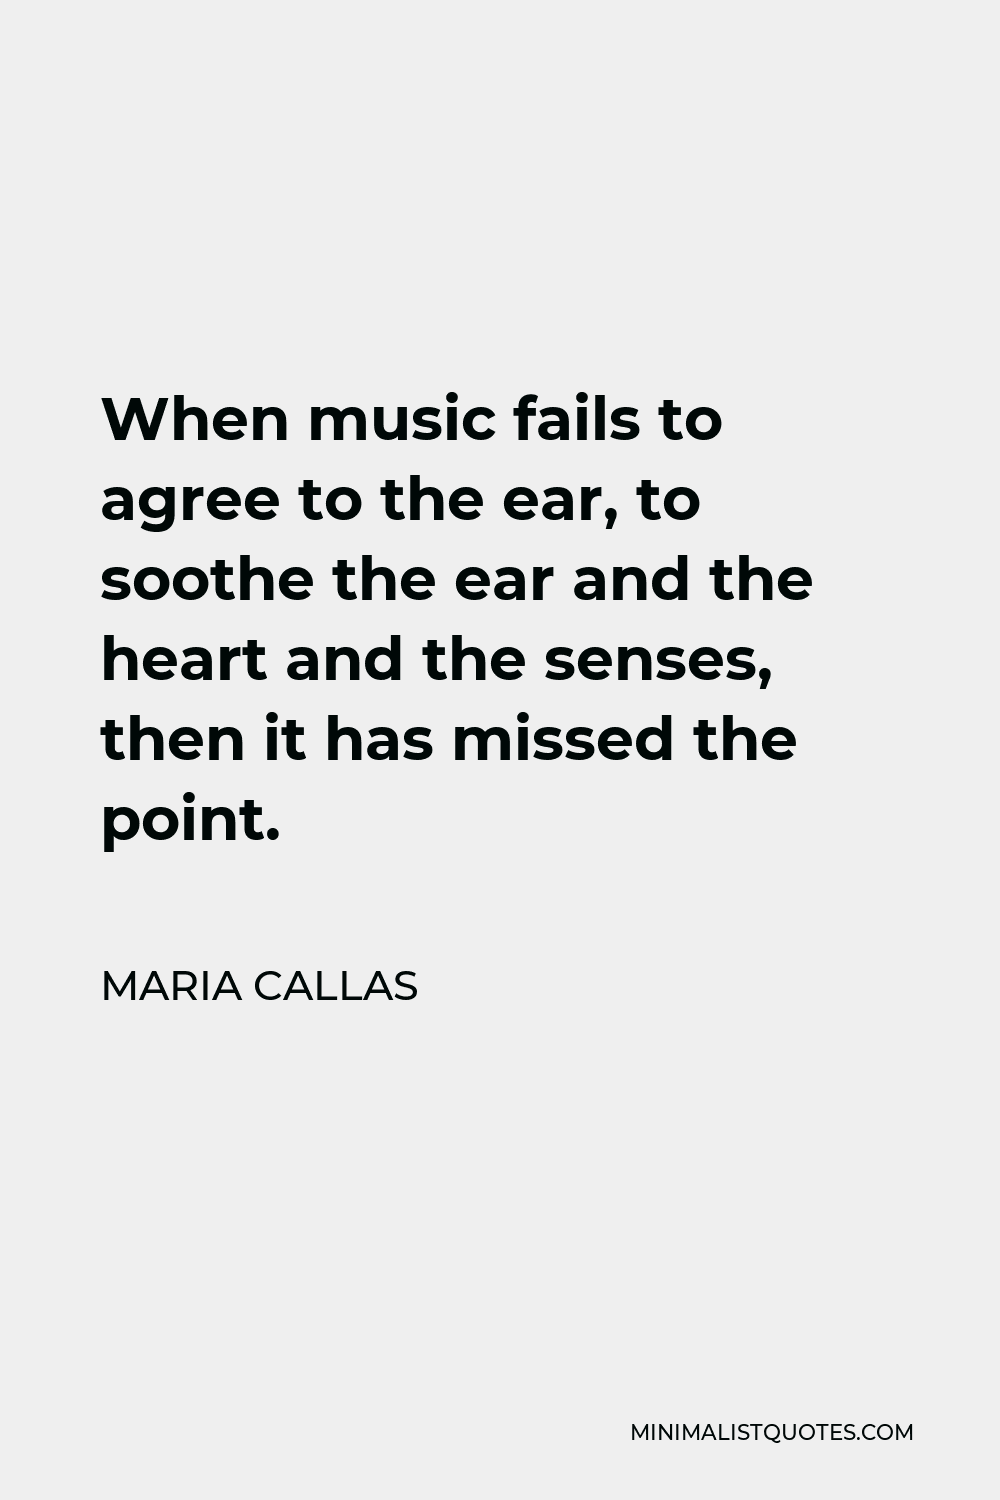 Maria Callas Quote - When music fails to agree to the ear, to soothe the ear and the heart and the senses, then it has missed the point.